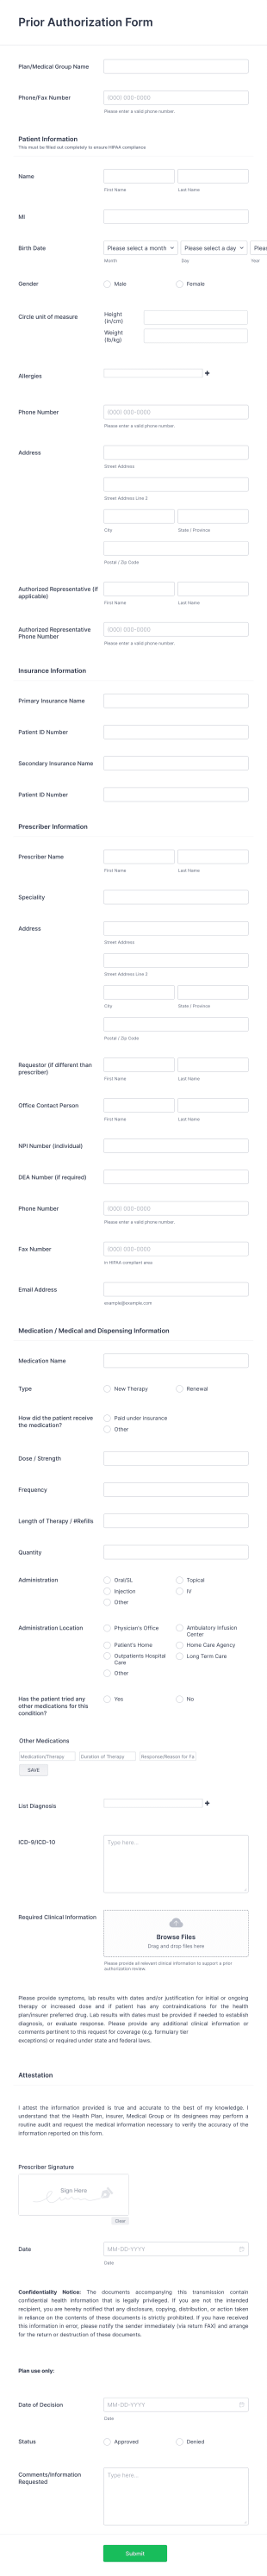 Prior Authorization Form Template